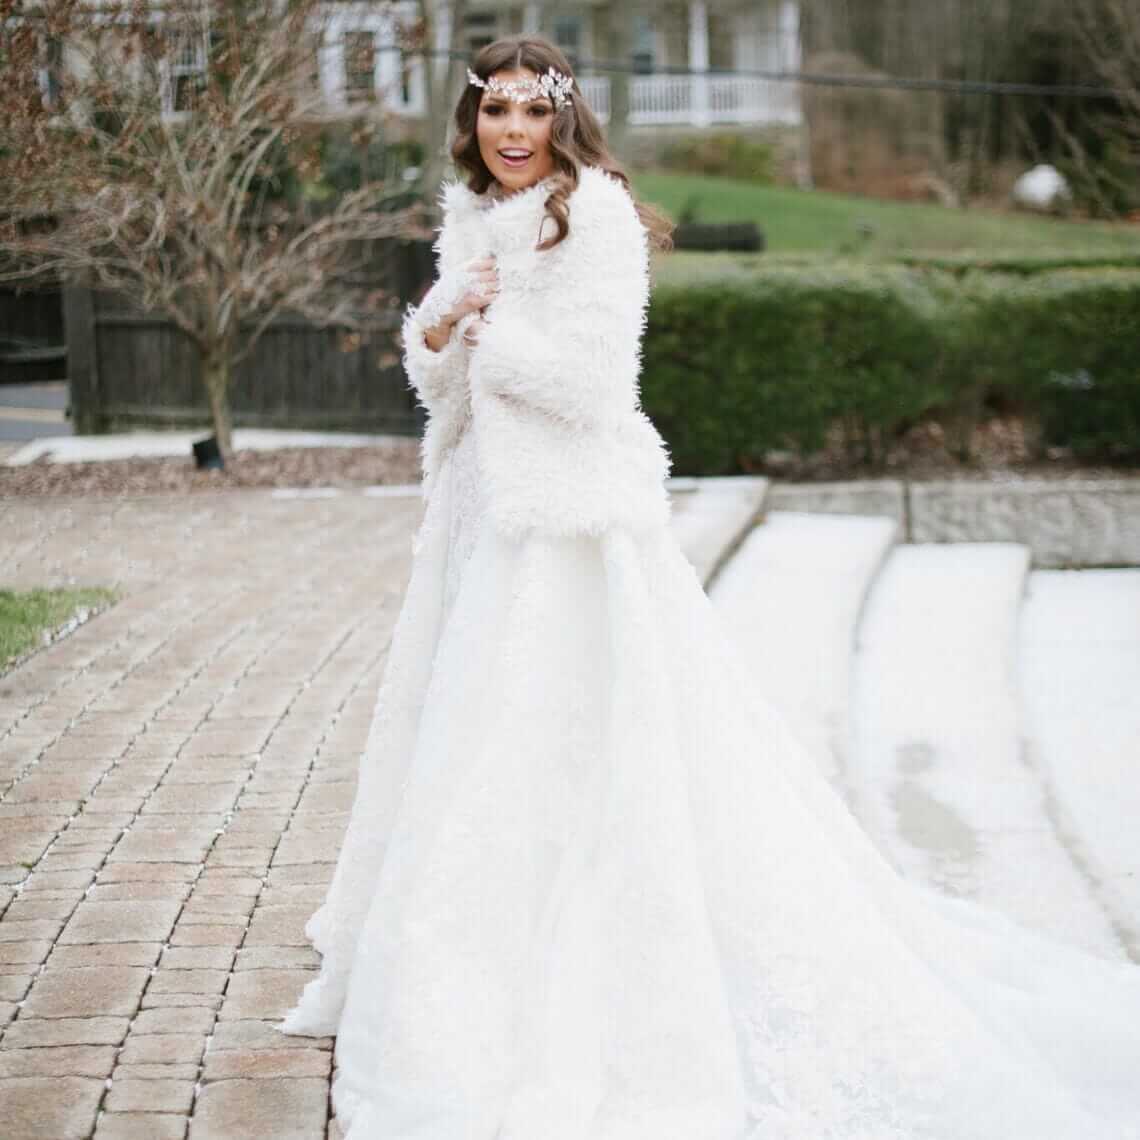 A bride in a white wedding dress and fur coat.